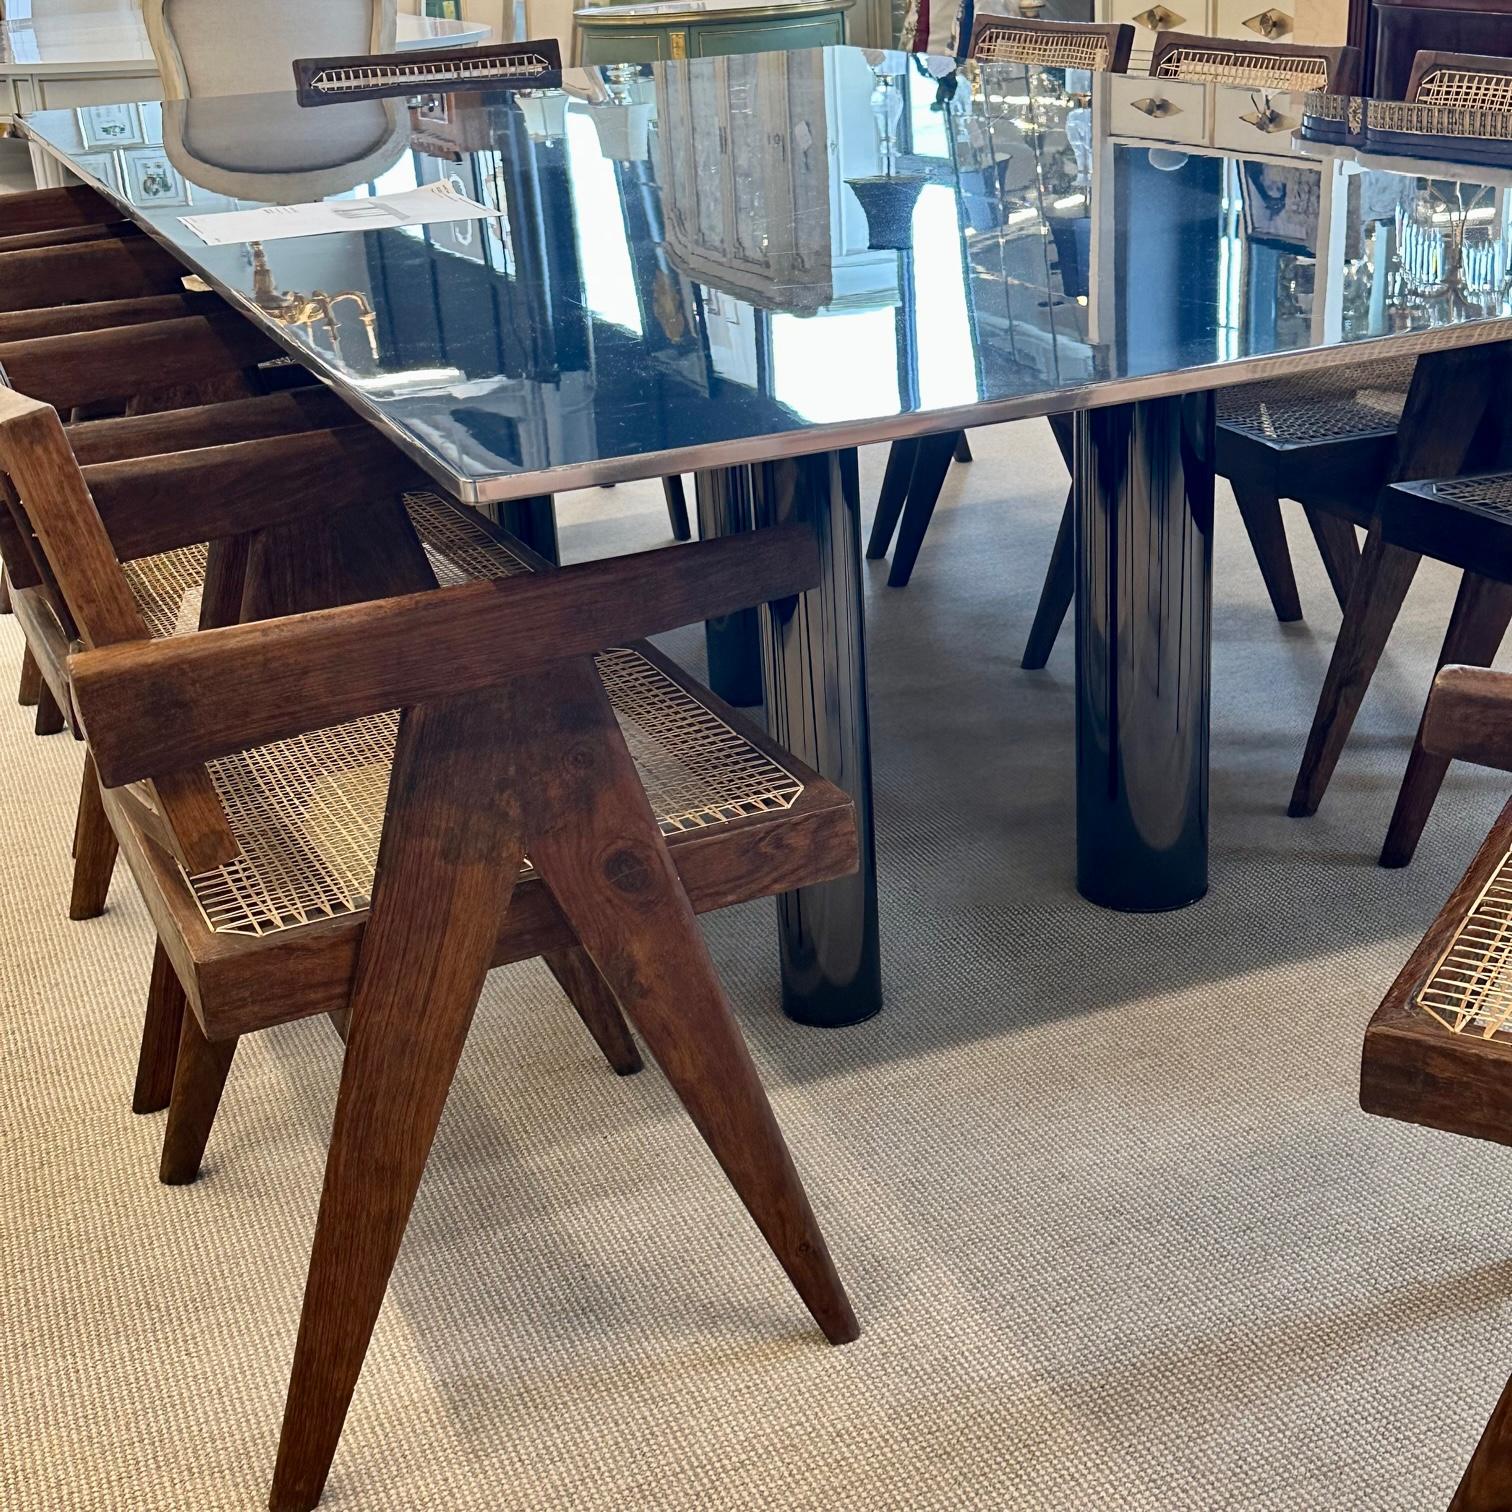 XXIe siècle et contemporain Martin Szekely, Contemporary, Limited Edition Dining Table, Steel, France, 2004 en vente